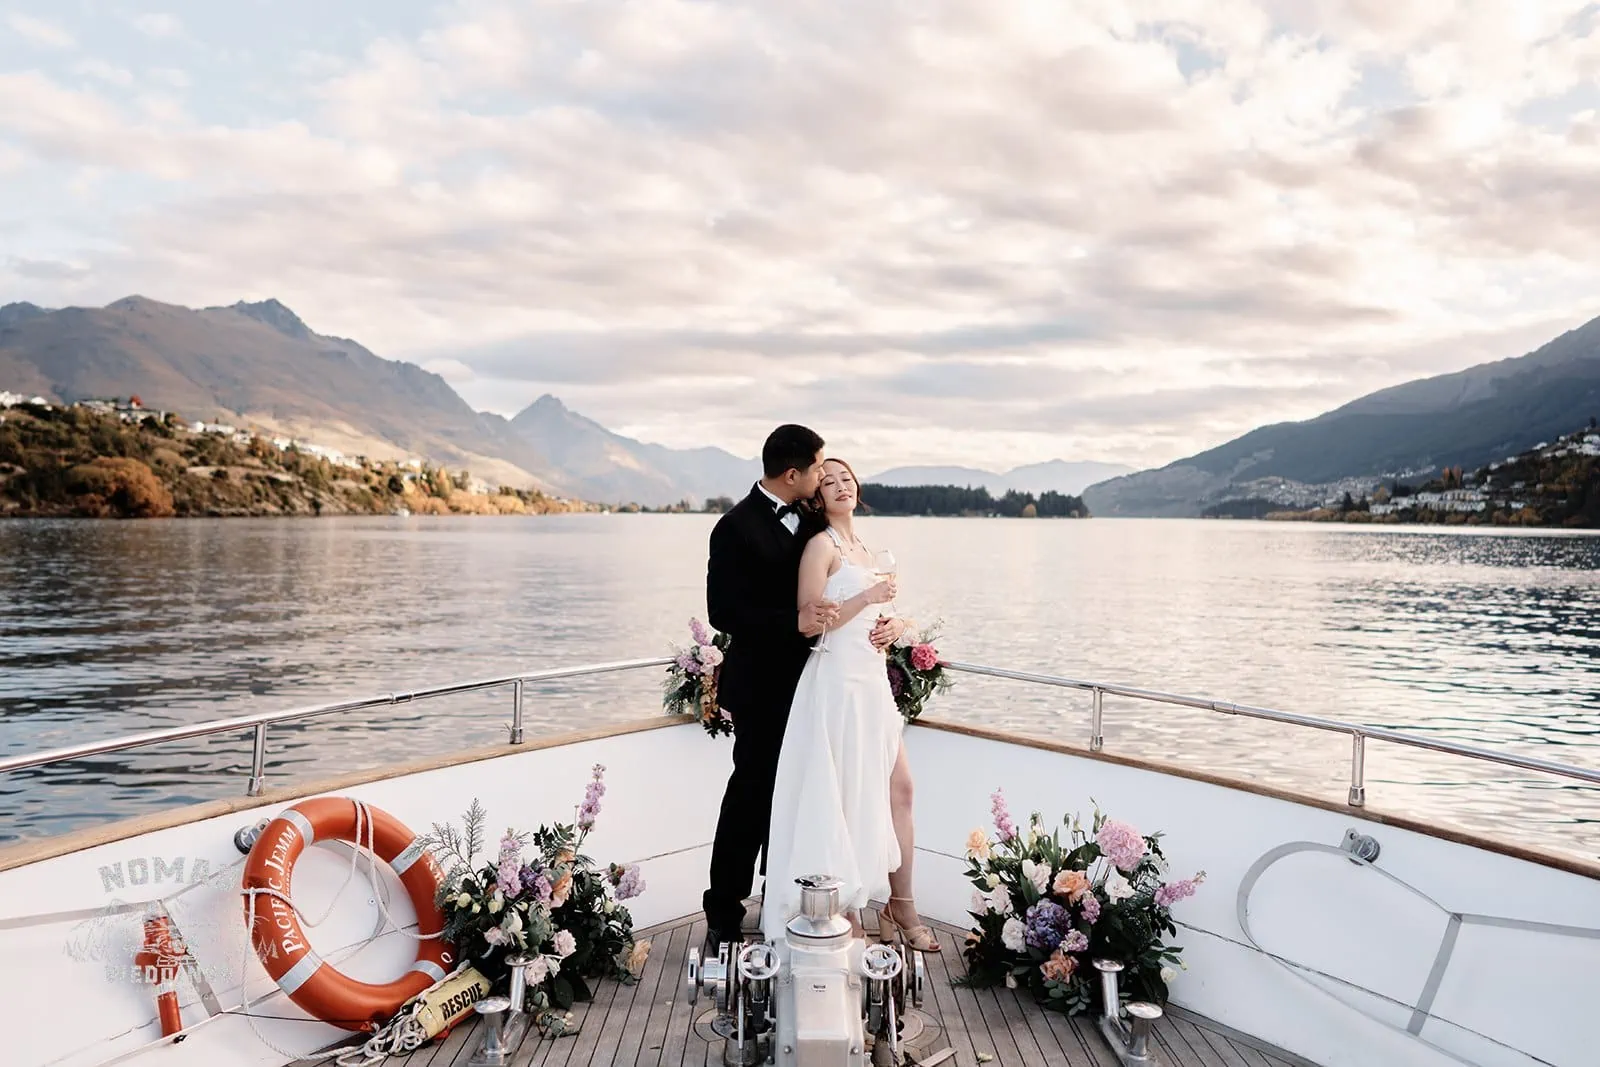 A bride and groom share a passionate kiss on the bow of a boat at Lake Wanaka, creating an unforgettable moment.